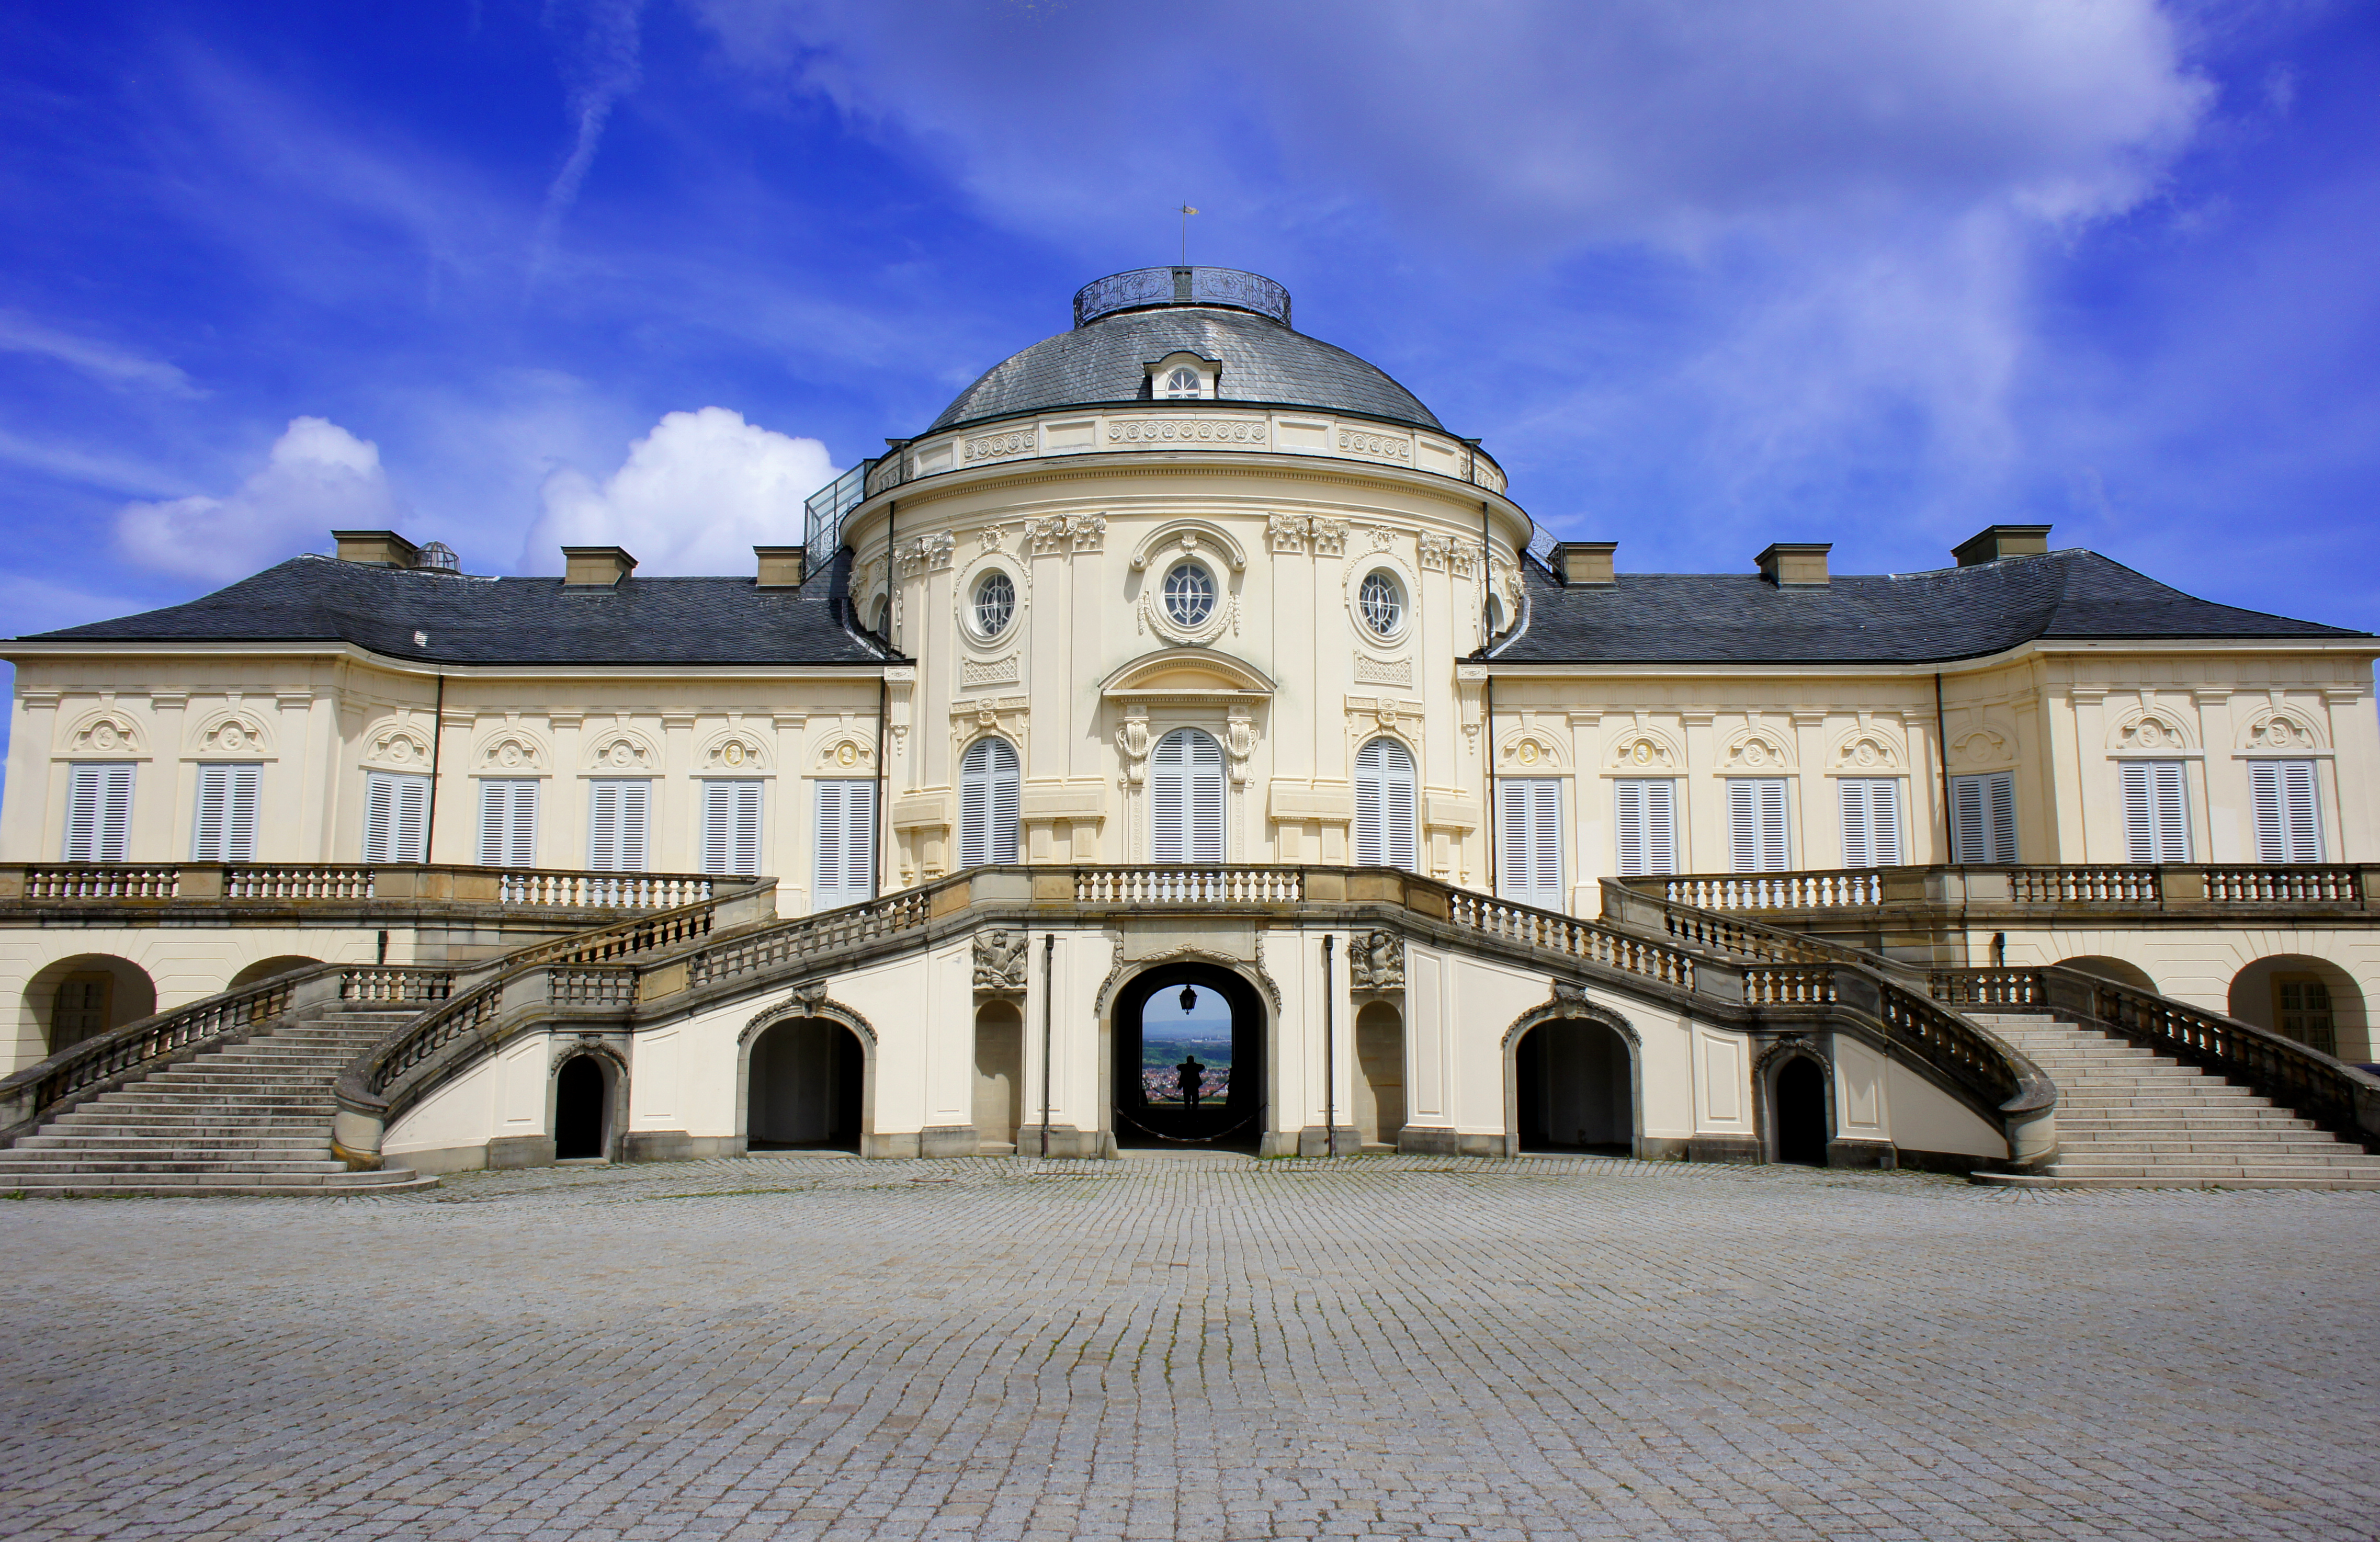 man made, castle solitude, germany, palaces